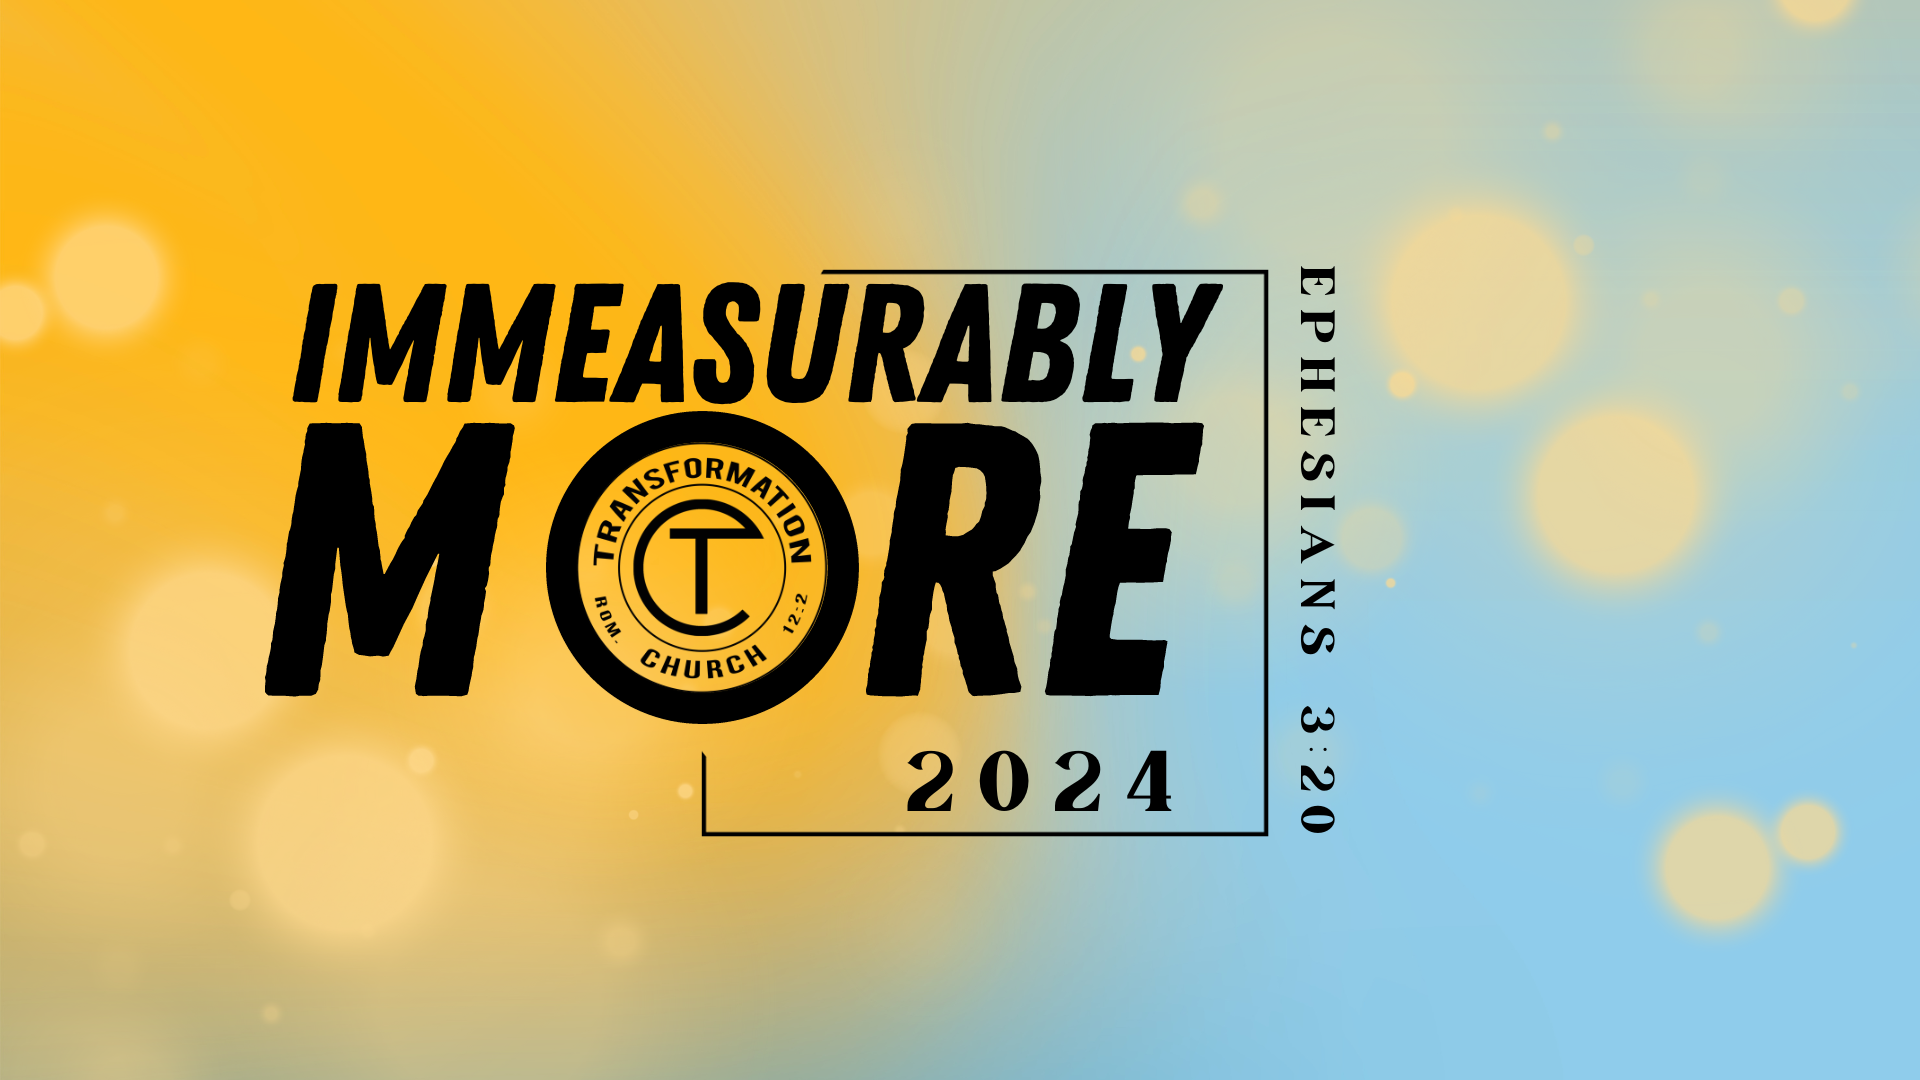 1 - Immeasurably More in 2024